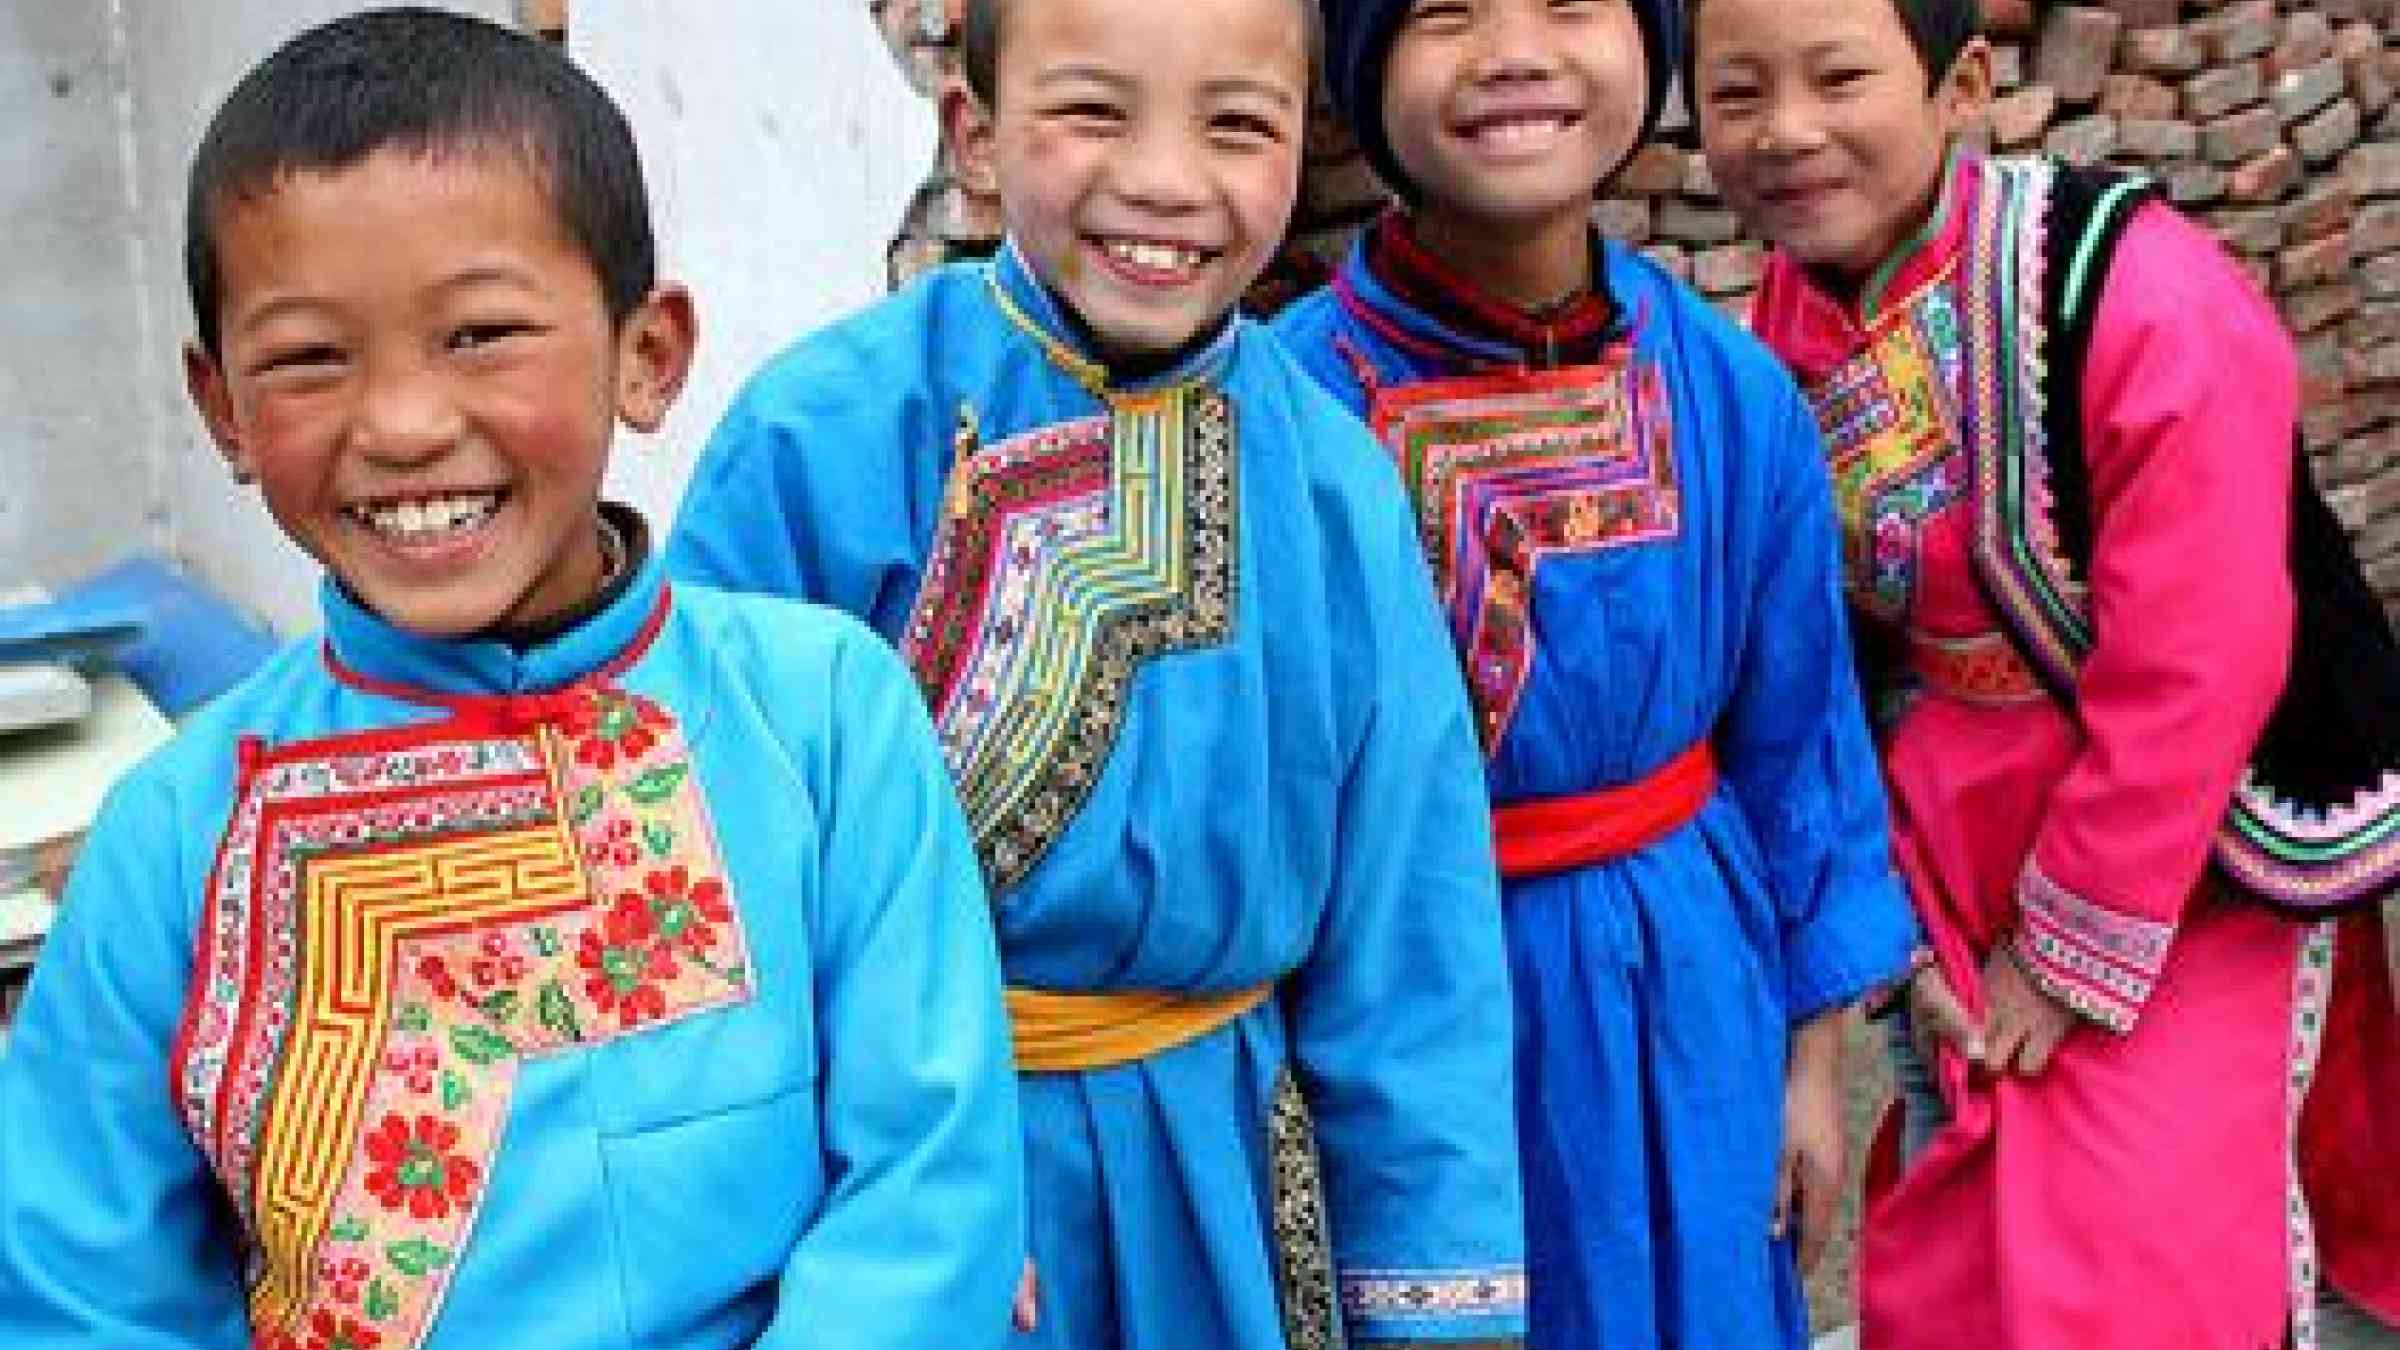 School children in Sichuan, China (photo: Flickr gill_penney)